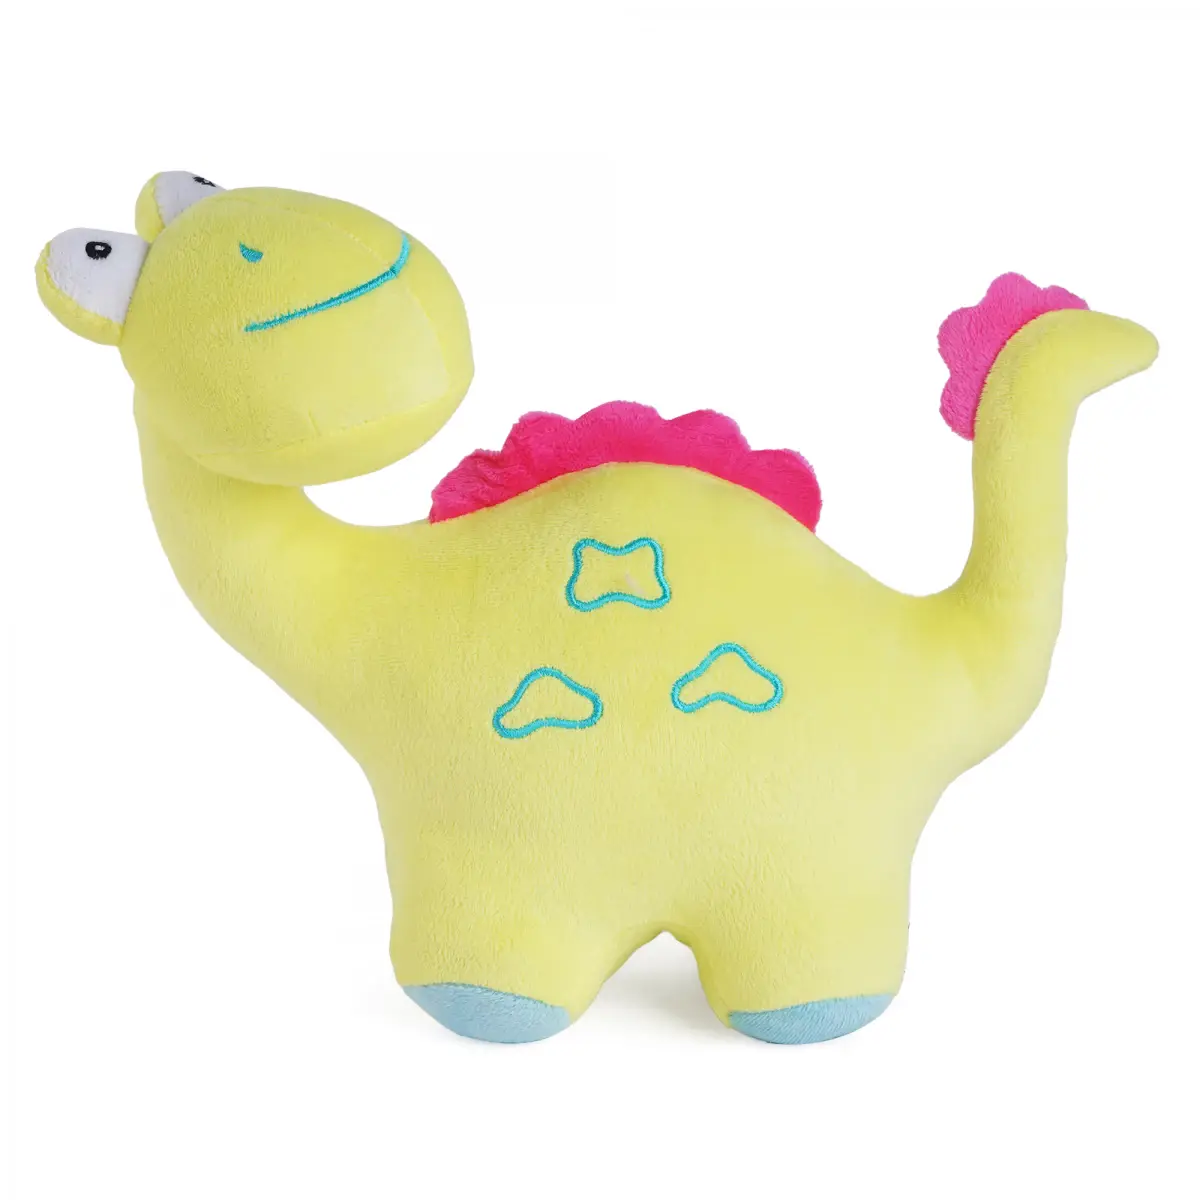 Huggable Cuddly Bary Dino Stuffed Toy By Fuzzbuzz, Soft Toys for Kids, Cute Plushies Yellow, For Kids Of Age 2 Years & Above, 26cm